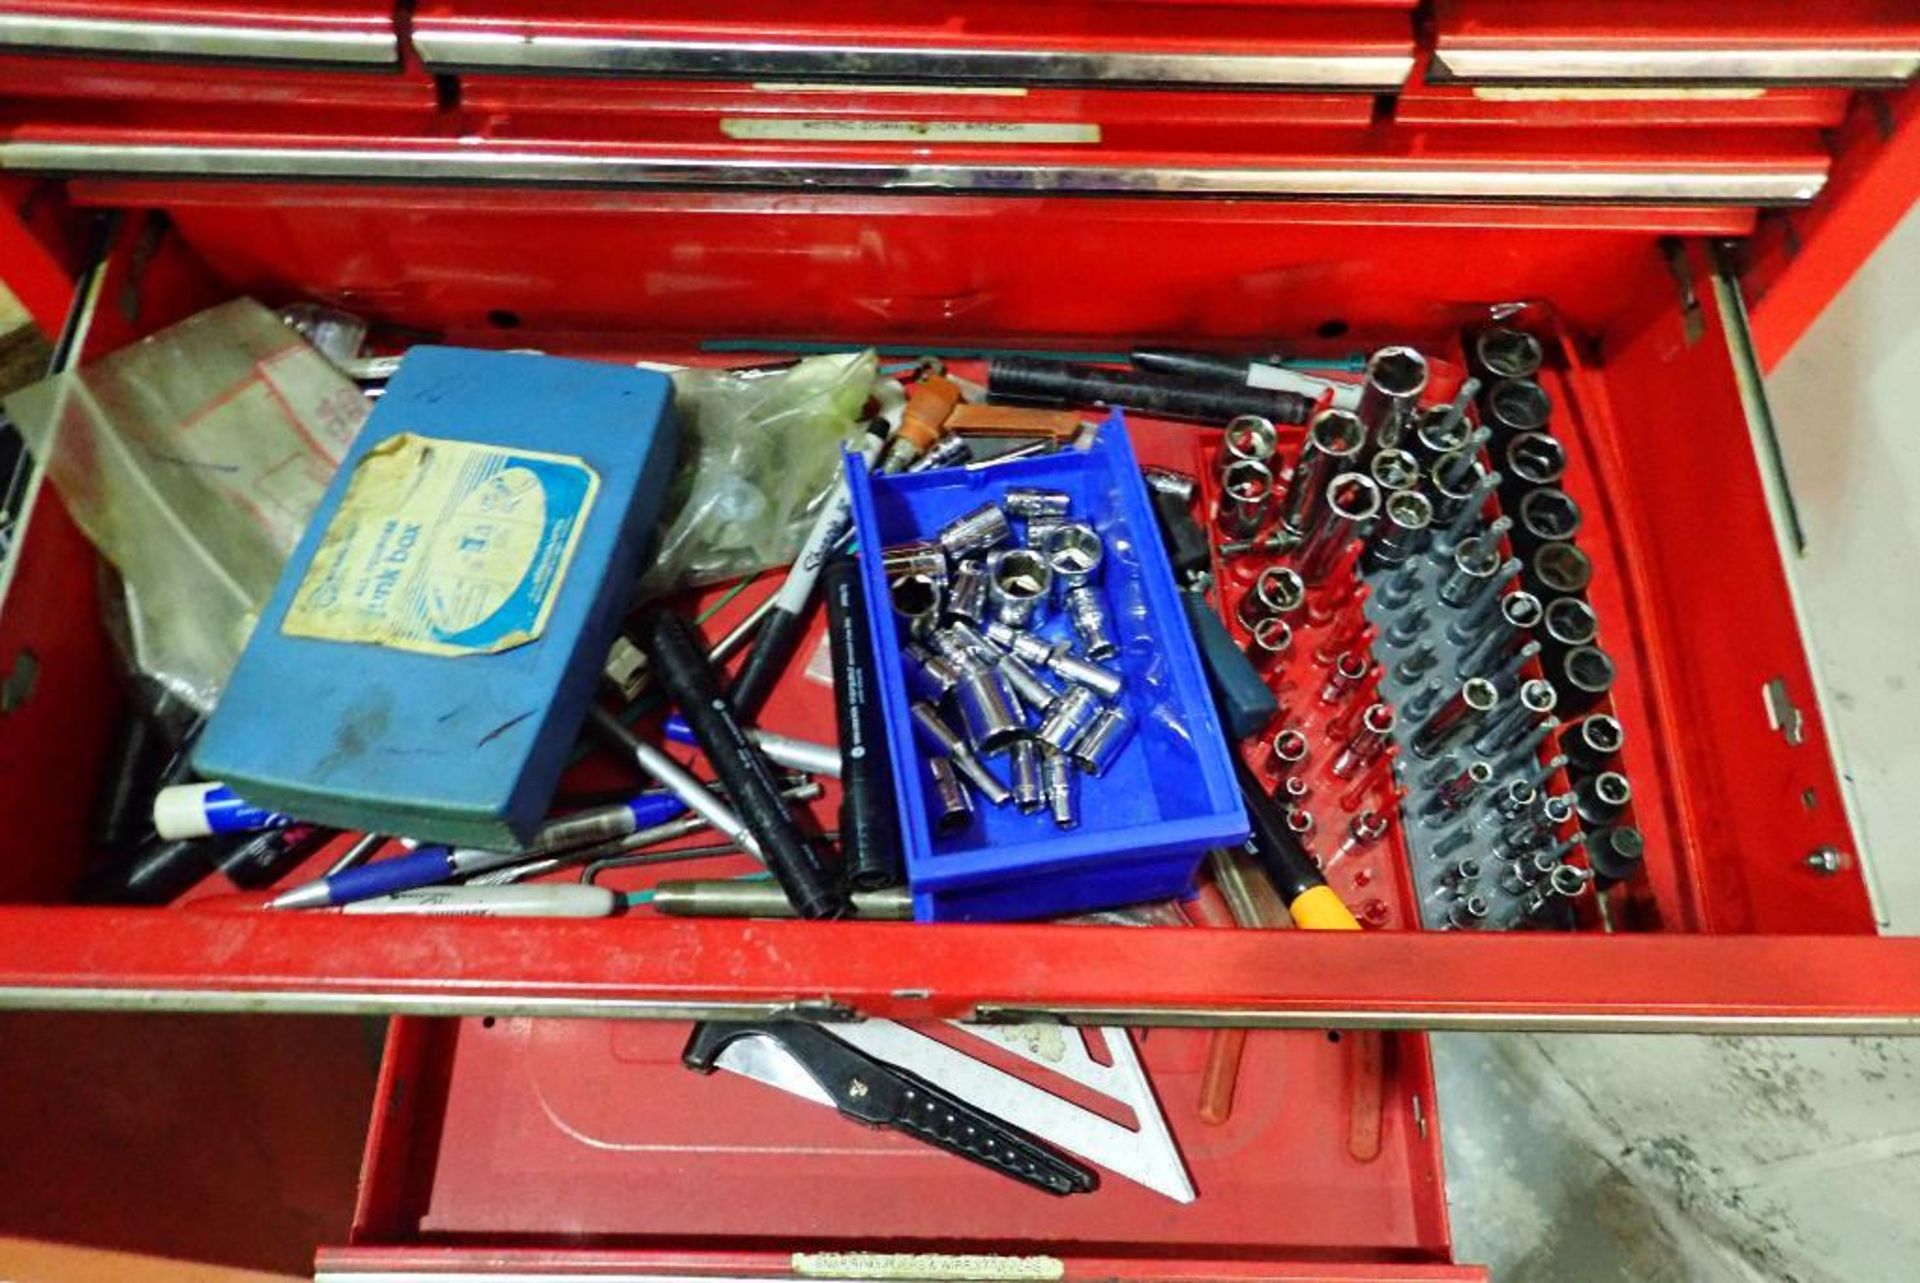 (2) tool chests with contents, wrenches, sockets, drill bits screw drivers, air tools, hammers, plie - Image 6 of 31